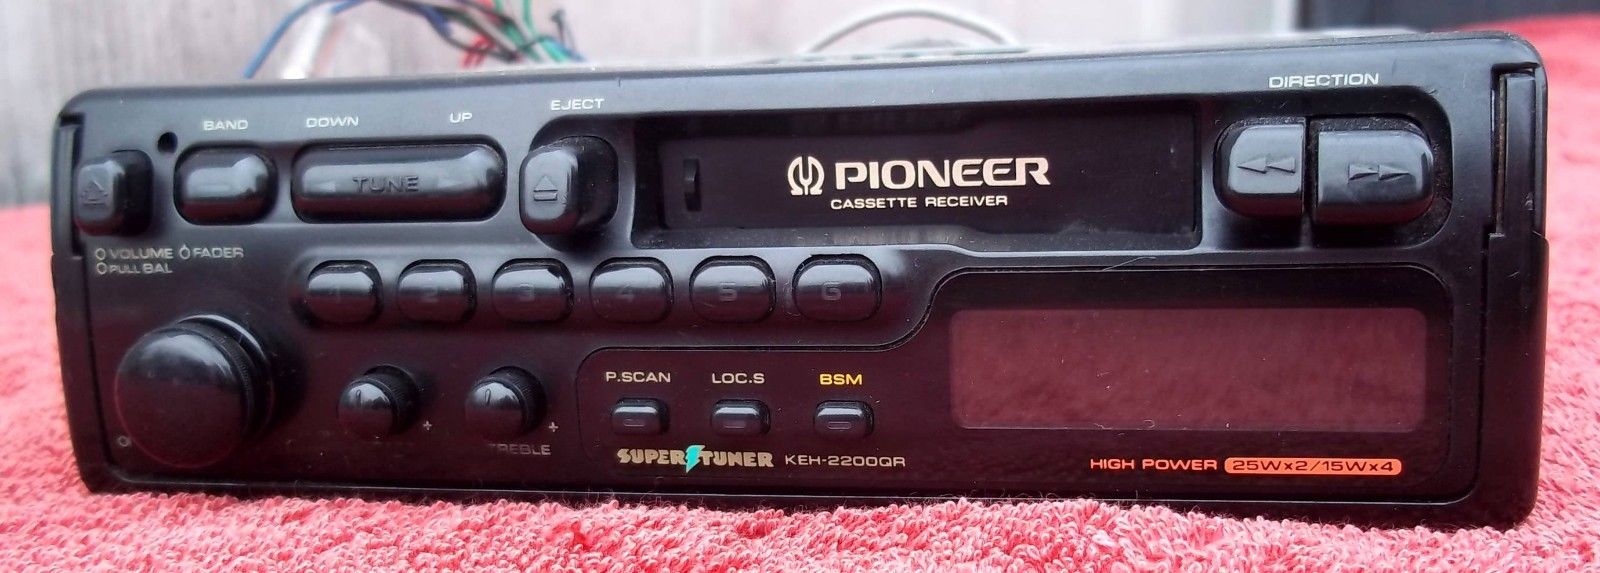 Pioneer Slide out AM/FM Stereo Cassette Receiver - KEH 2200QR - Tested